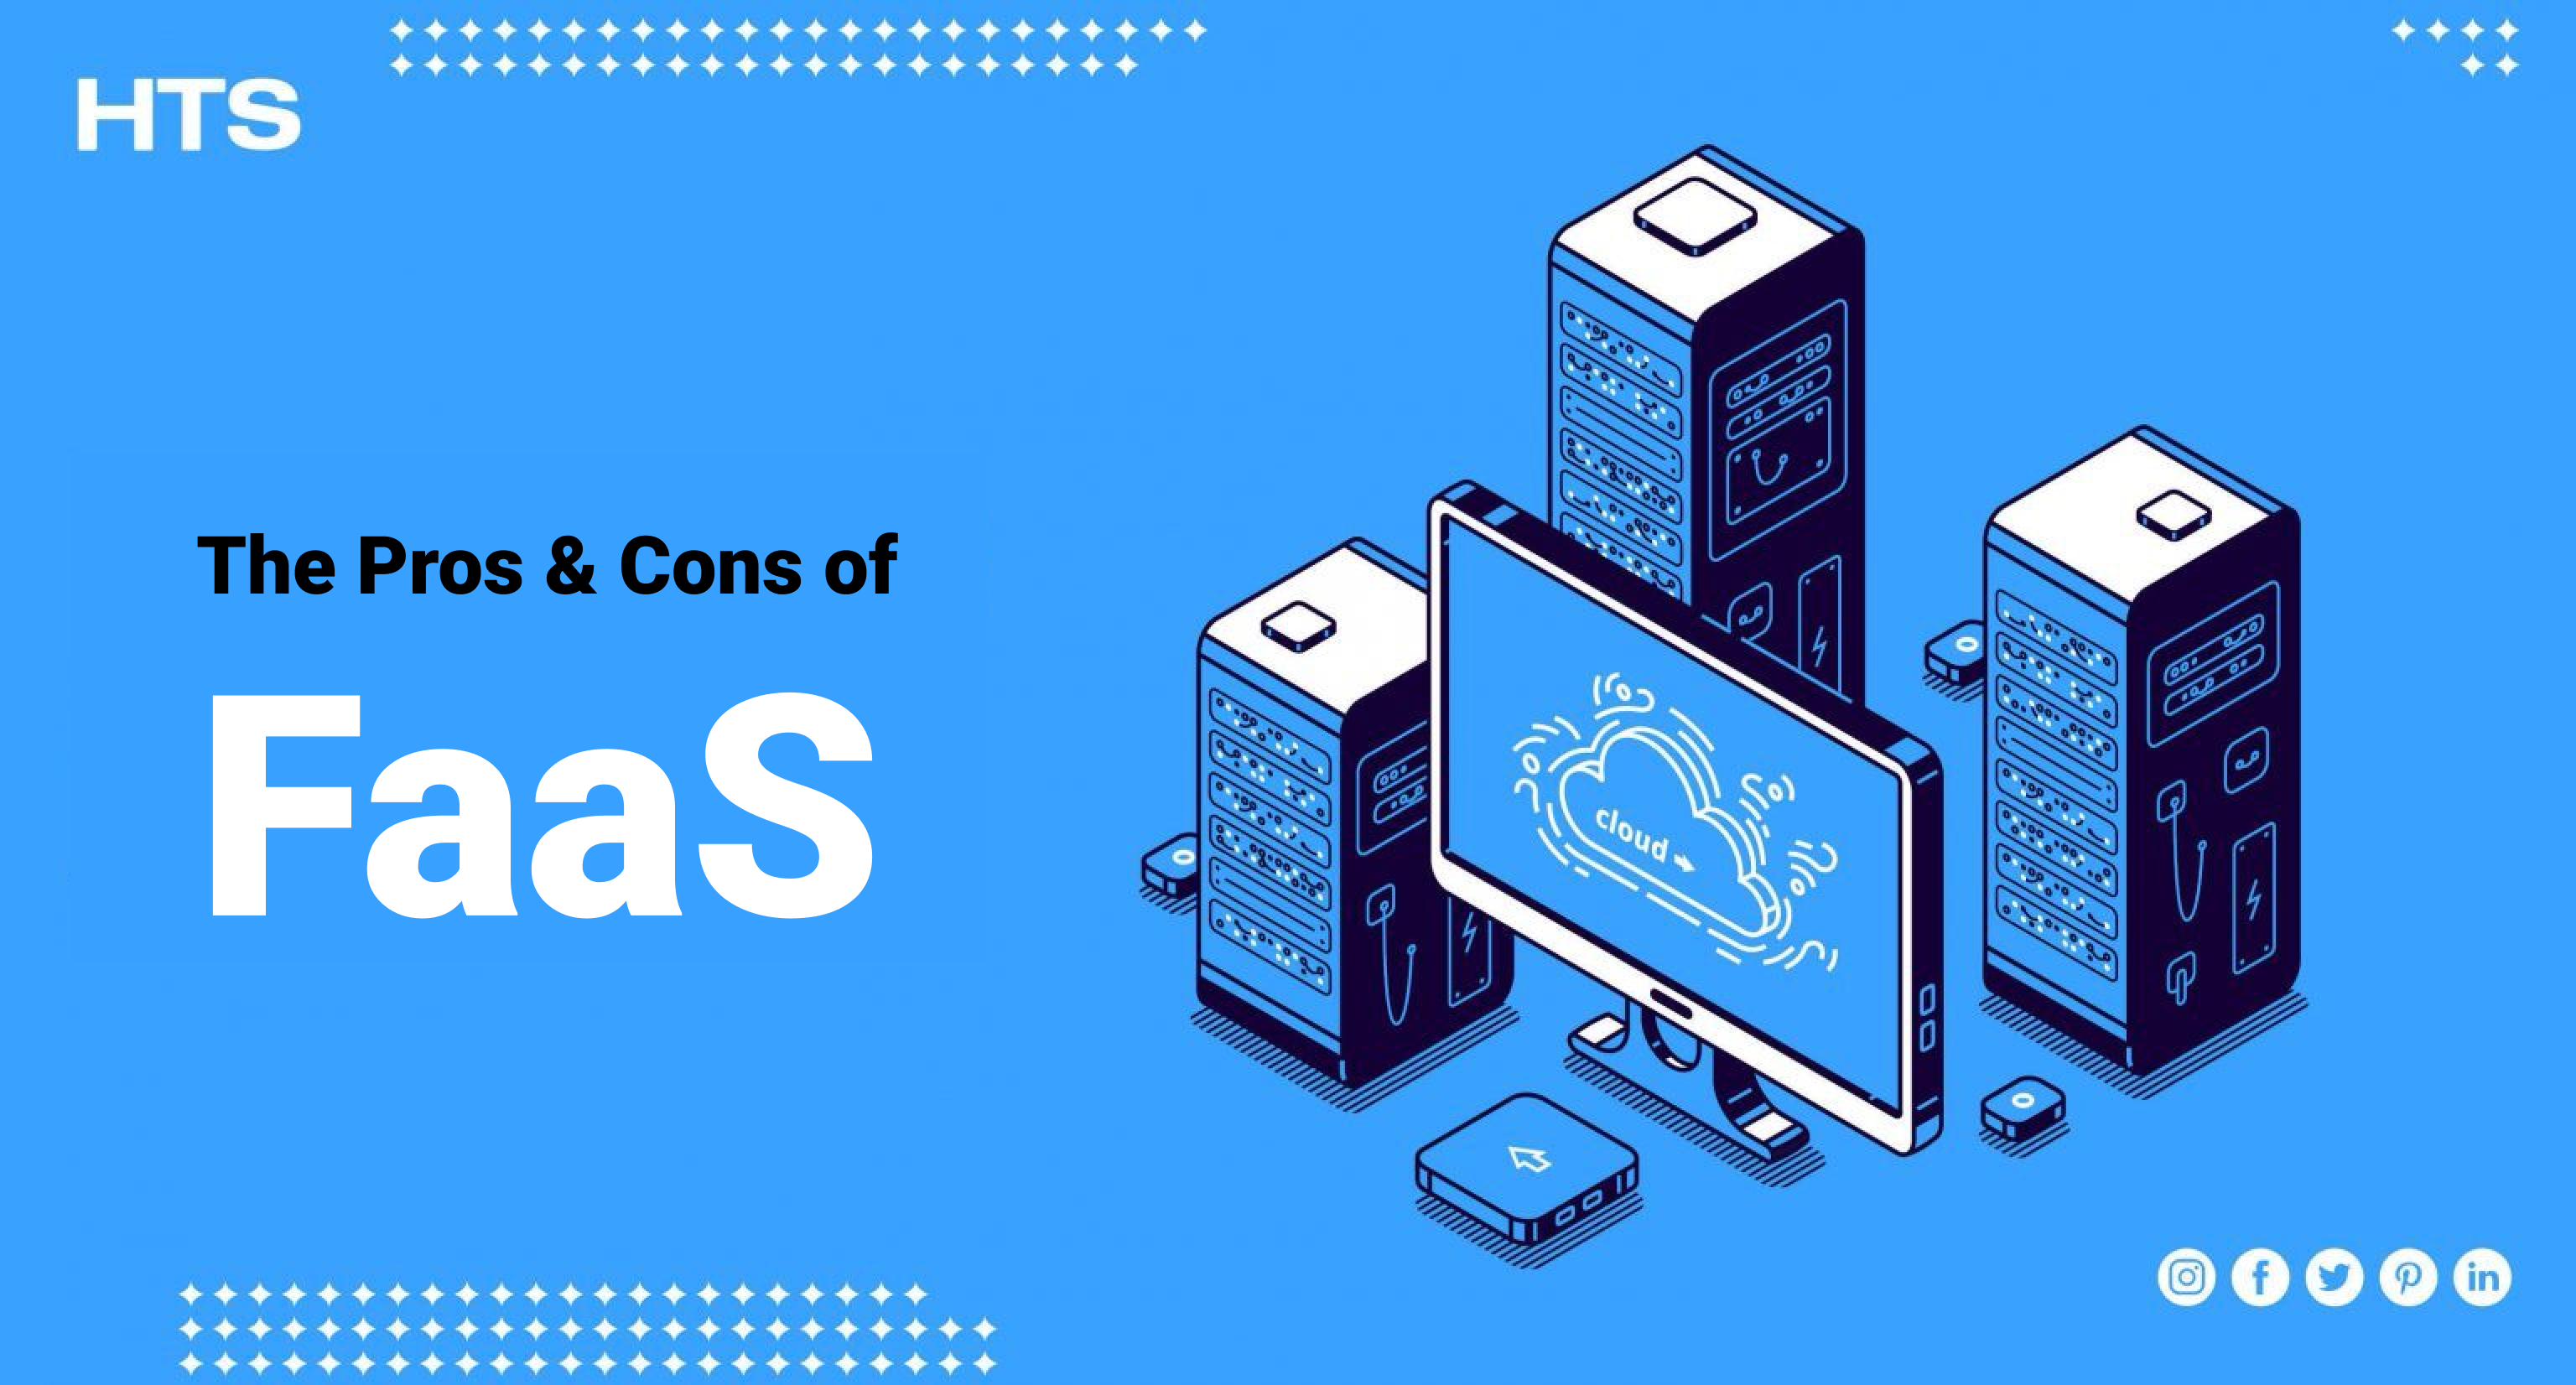 Pros & Cons of FaaS